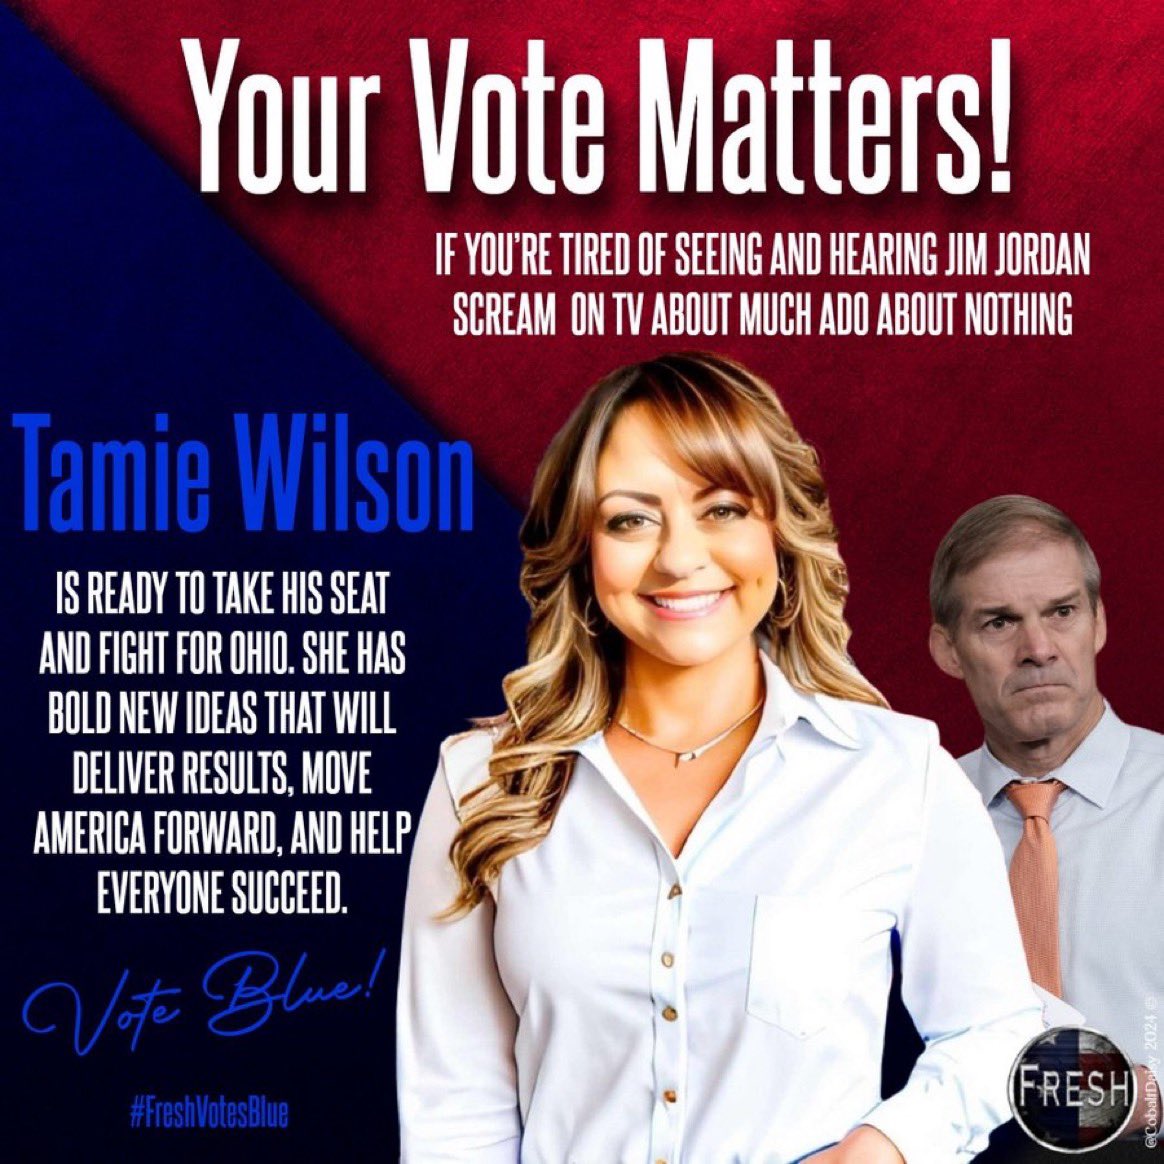 The 118th Congress is one of the least productive sessions in Congressional history & Jim Jordan is one of its biggest failures. Lots of unfounded investigations but no results for Ohio. Time for change OH04. Vote @TamieUSCongress #Fresh #wtpGOTV24